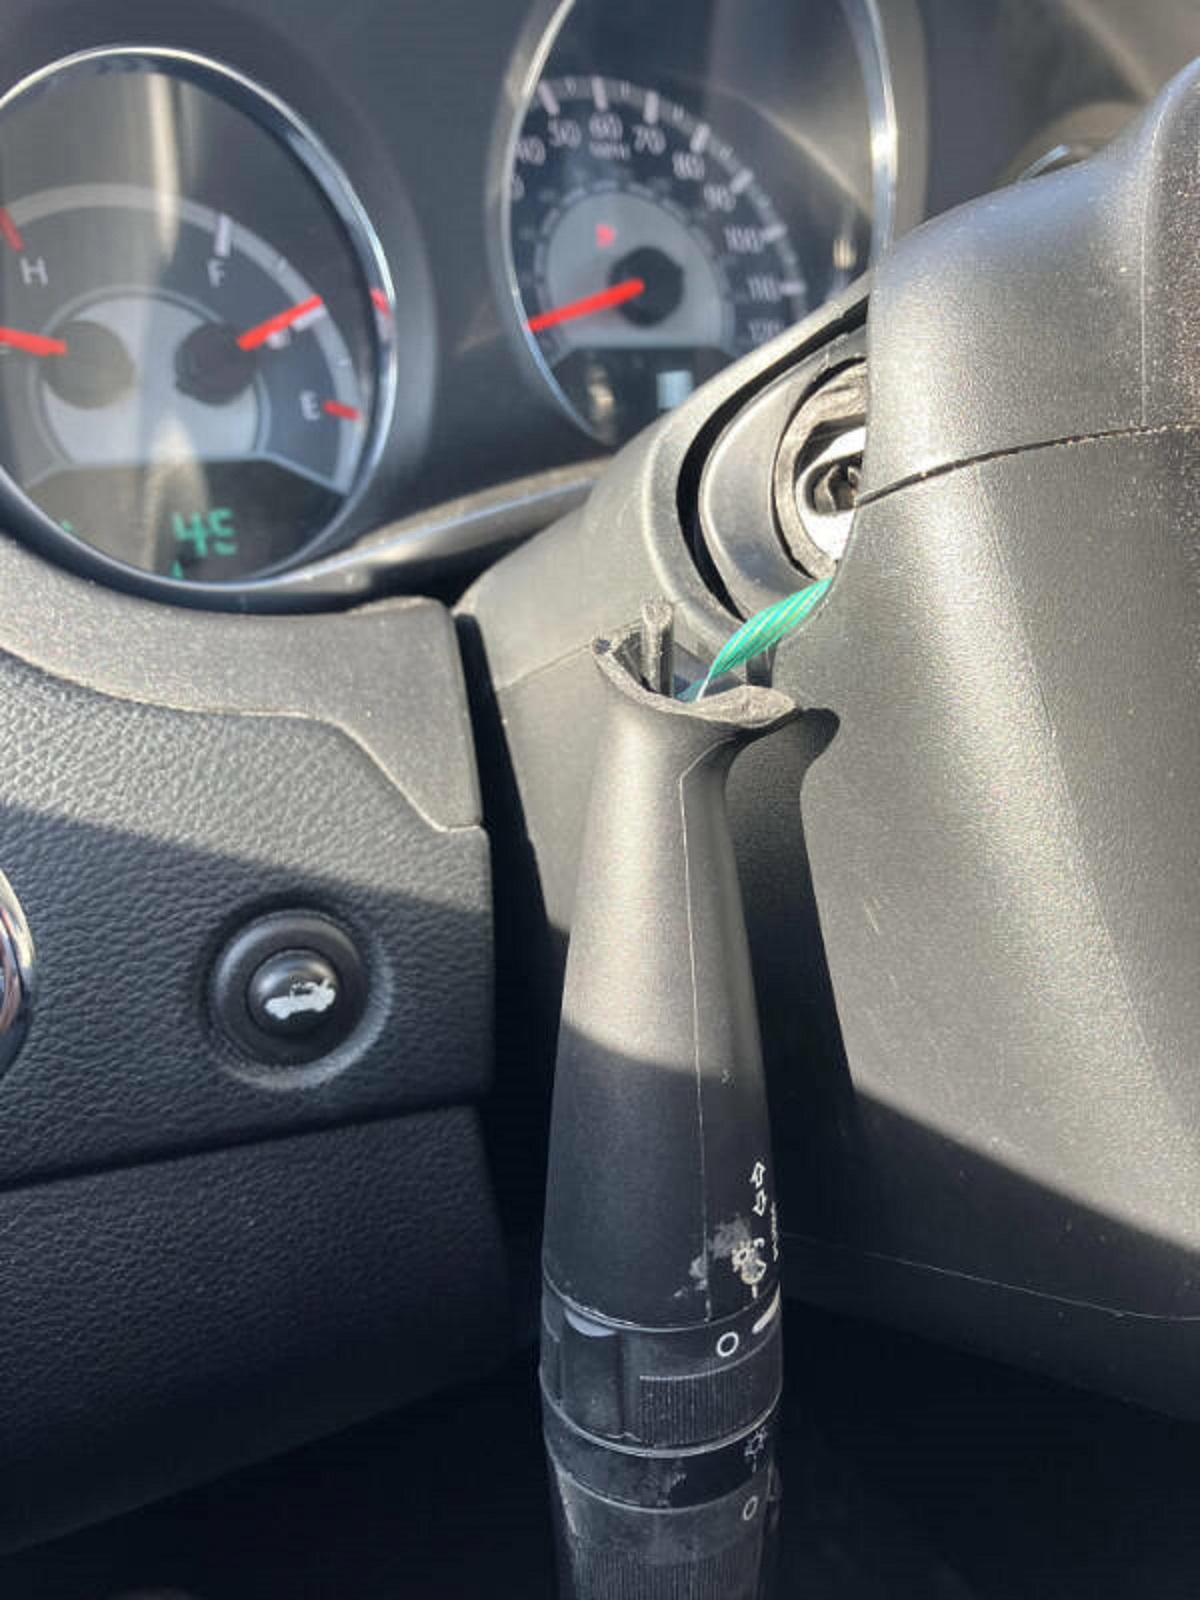 “Paid almost 1k to fix my car last week and today my blinker broke.”